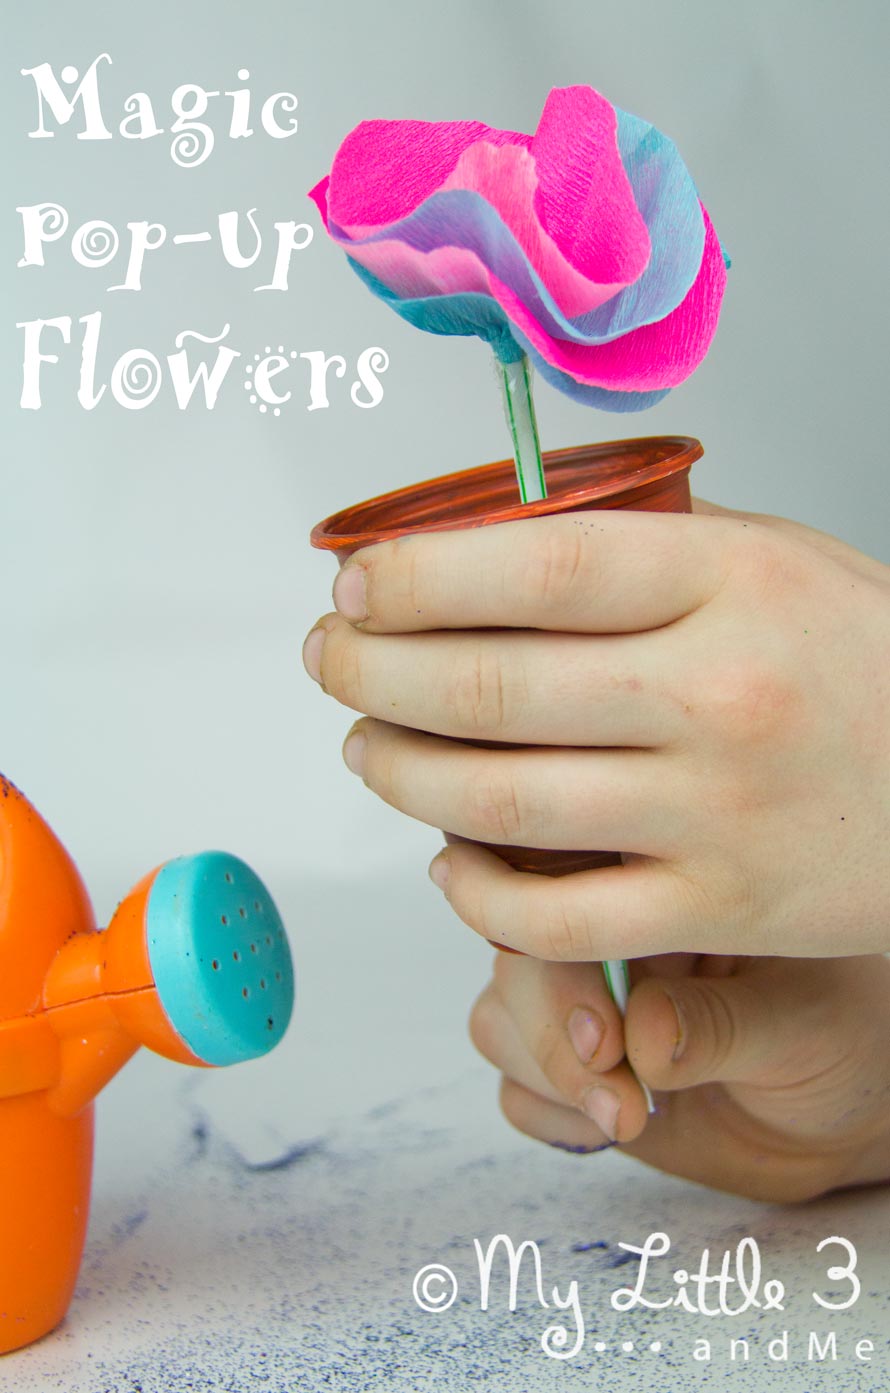 Magic Pop Up Flowers, an interactive Mary Mary Quite Contrary Nursery Rhyme Craft